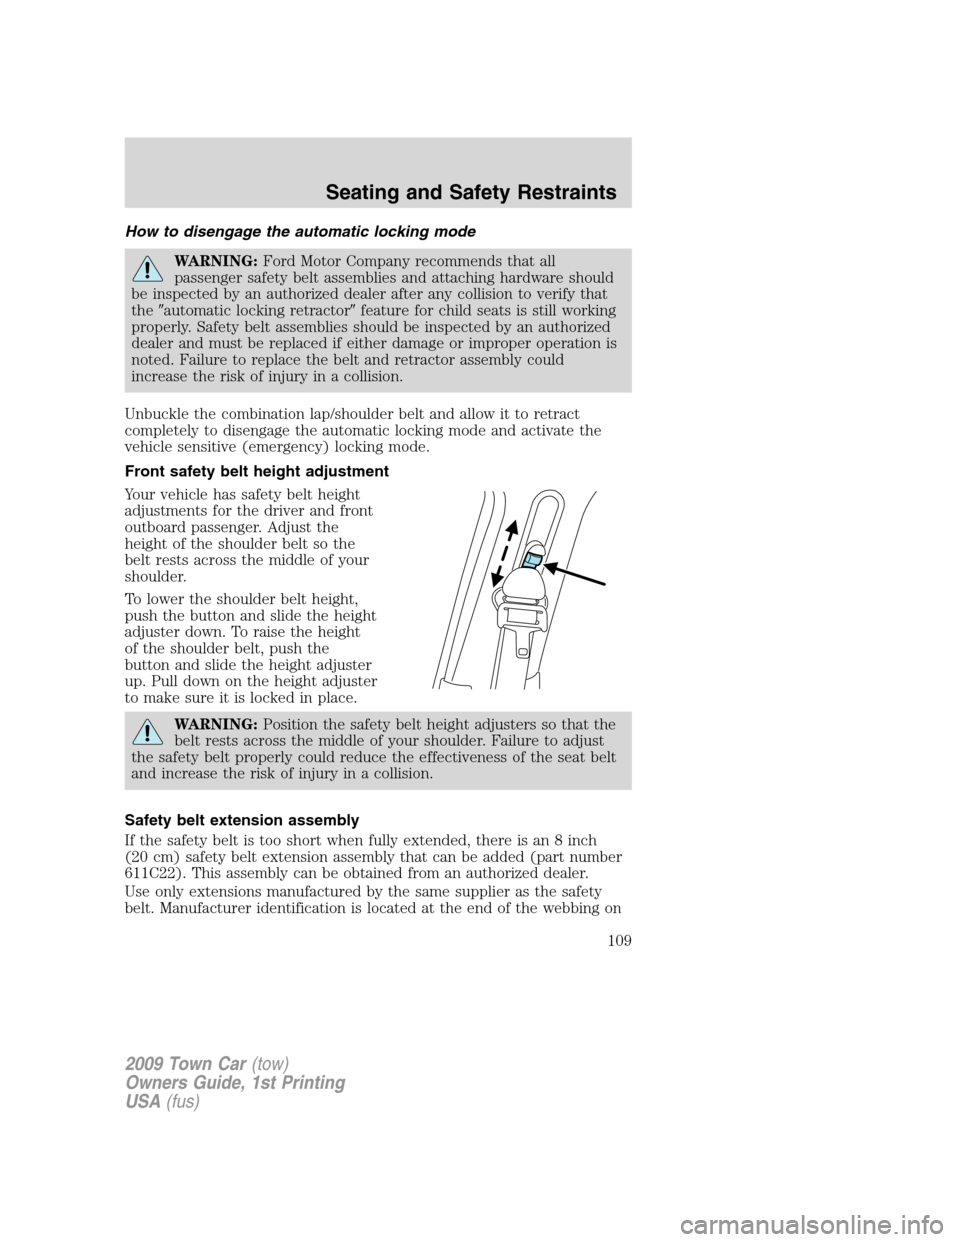 LINCOLN TOWN CAR 2009 Service Manual How to disengage the automatic locking mode
WARNING:Ford Motor Company recommends that all
passenger safety belt assemblies and attaching hardware should
be inspected by an authorized dealer after any